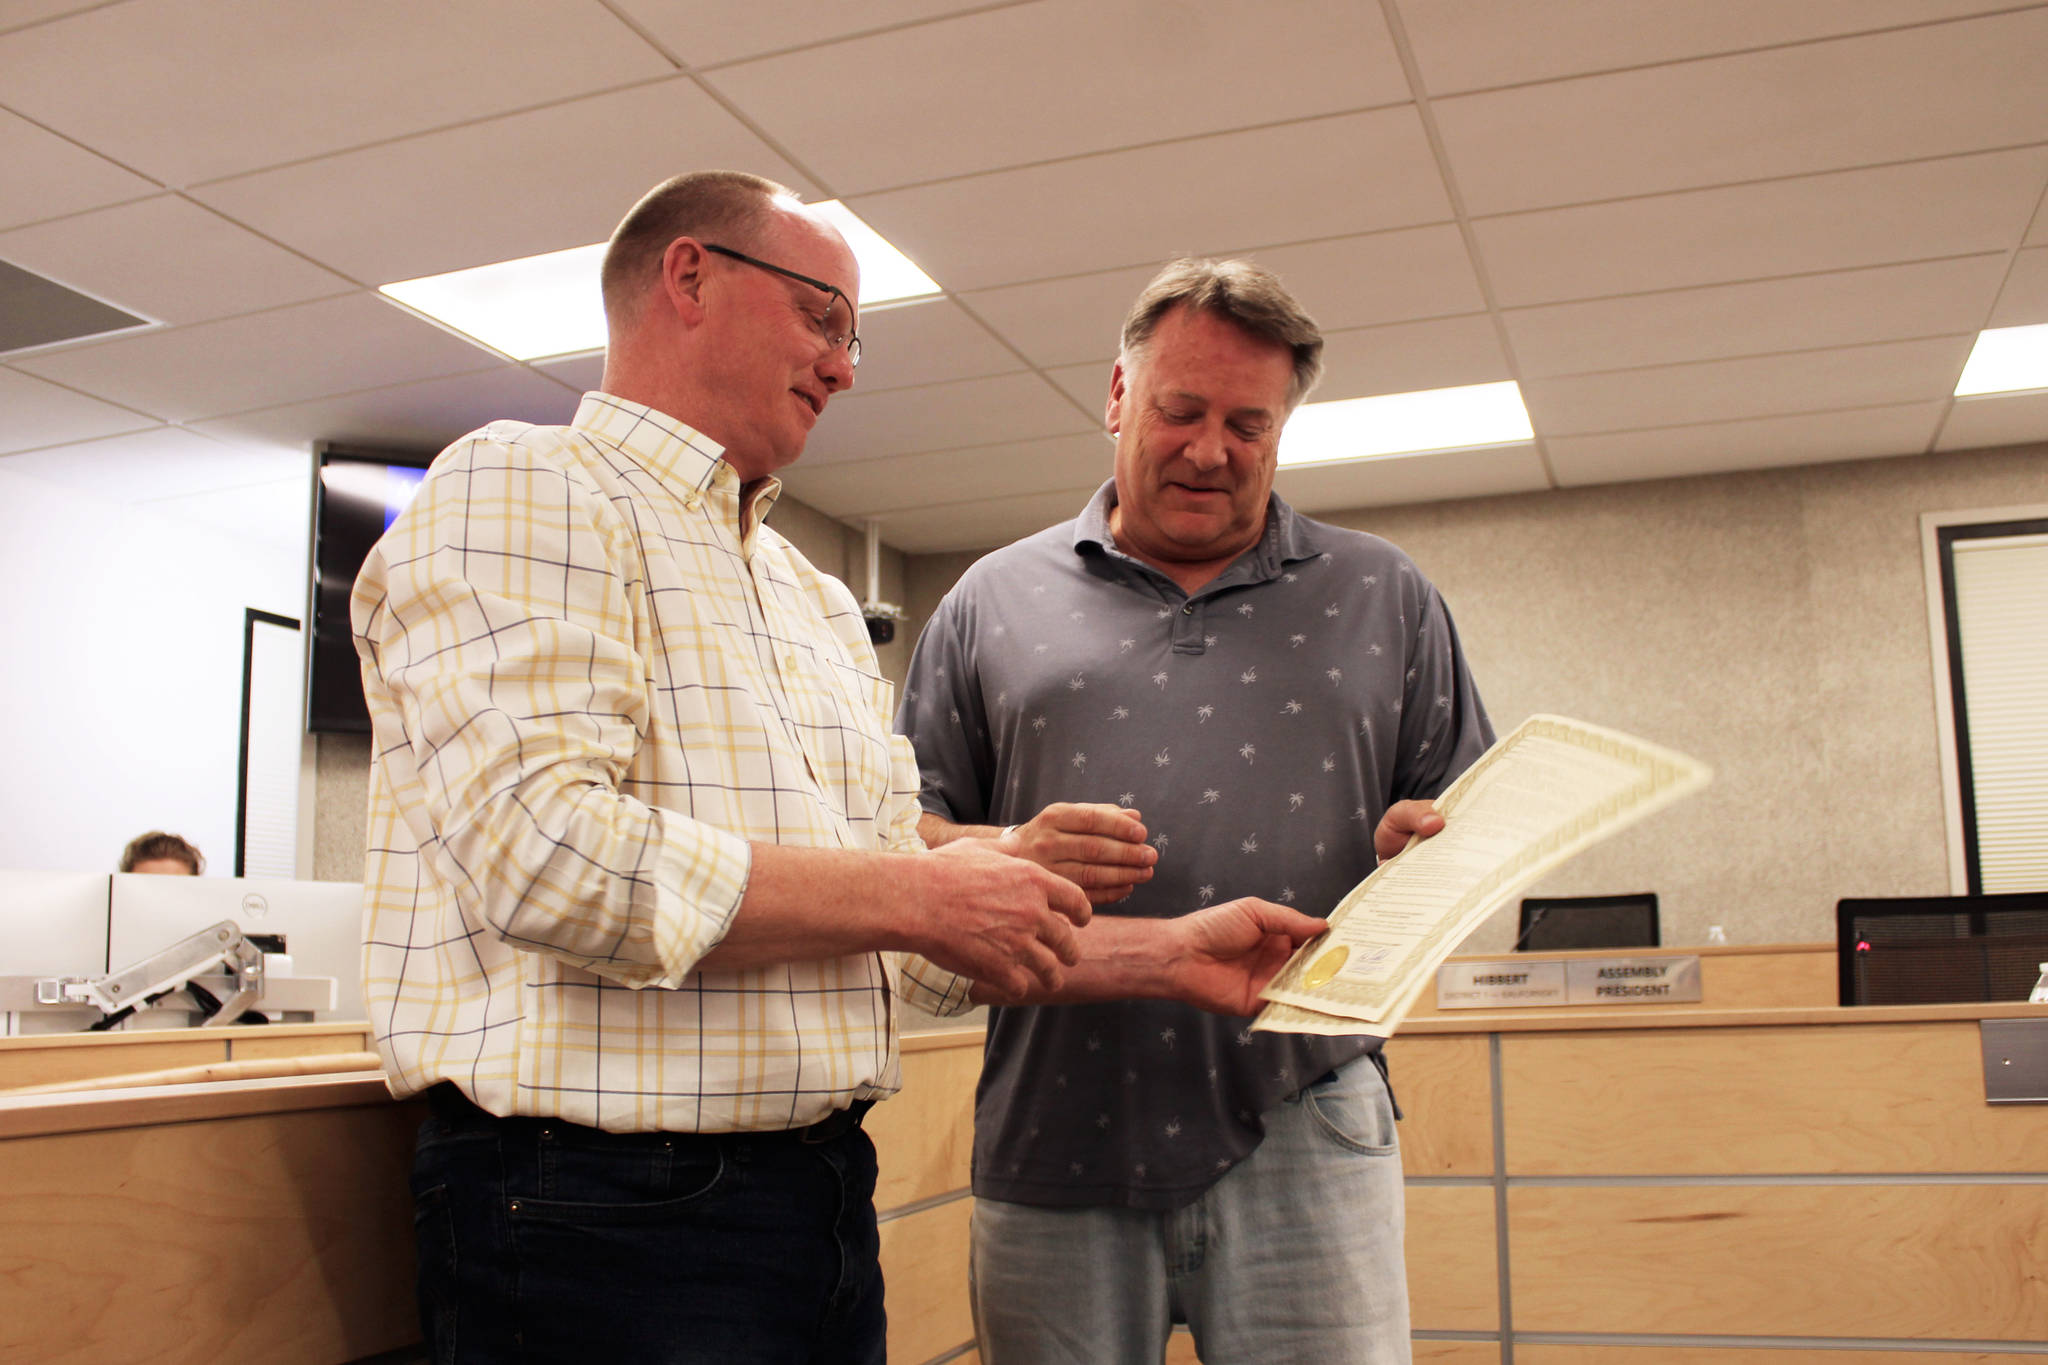 Brent Hibbert (left) presents Tim Dillon (right) with a commending resolution on Tuesday, June 15, 2021 in Soldotna, Alaska. (Ashlyn O’Hara/Peninsula Clarion)